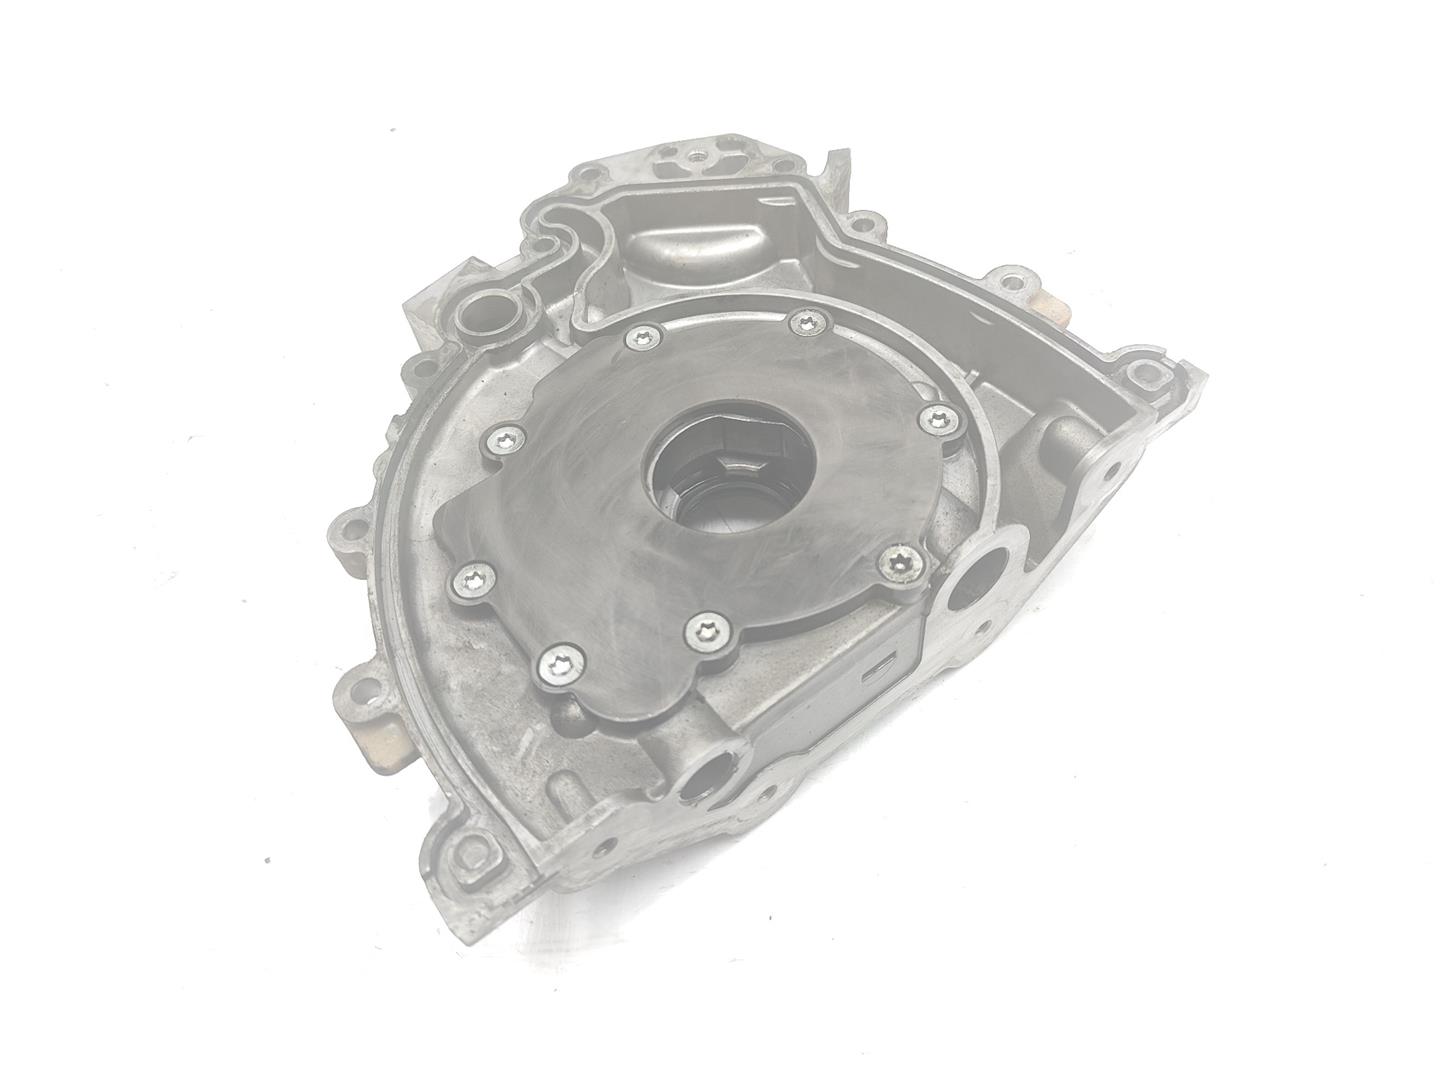 LAND ROVER Discovery 3 generation (2004-2009) Oil Pump LR002465, 4R8Q6600AD 24125821